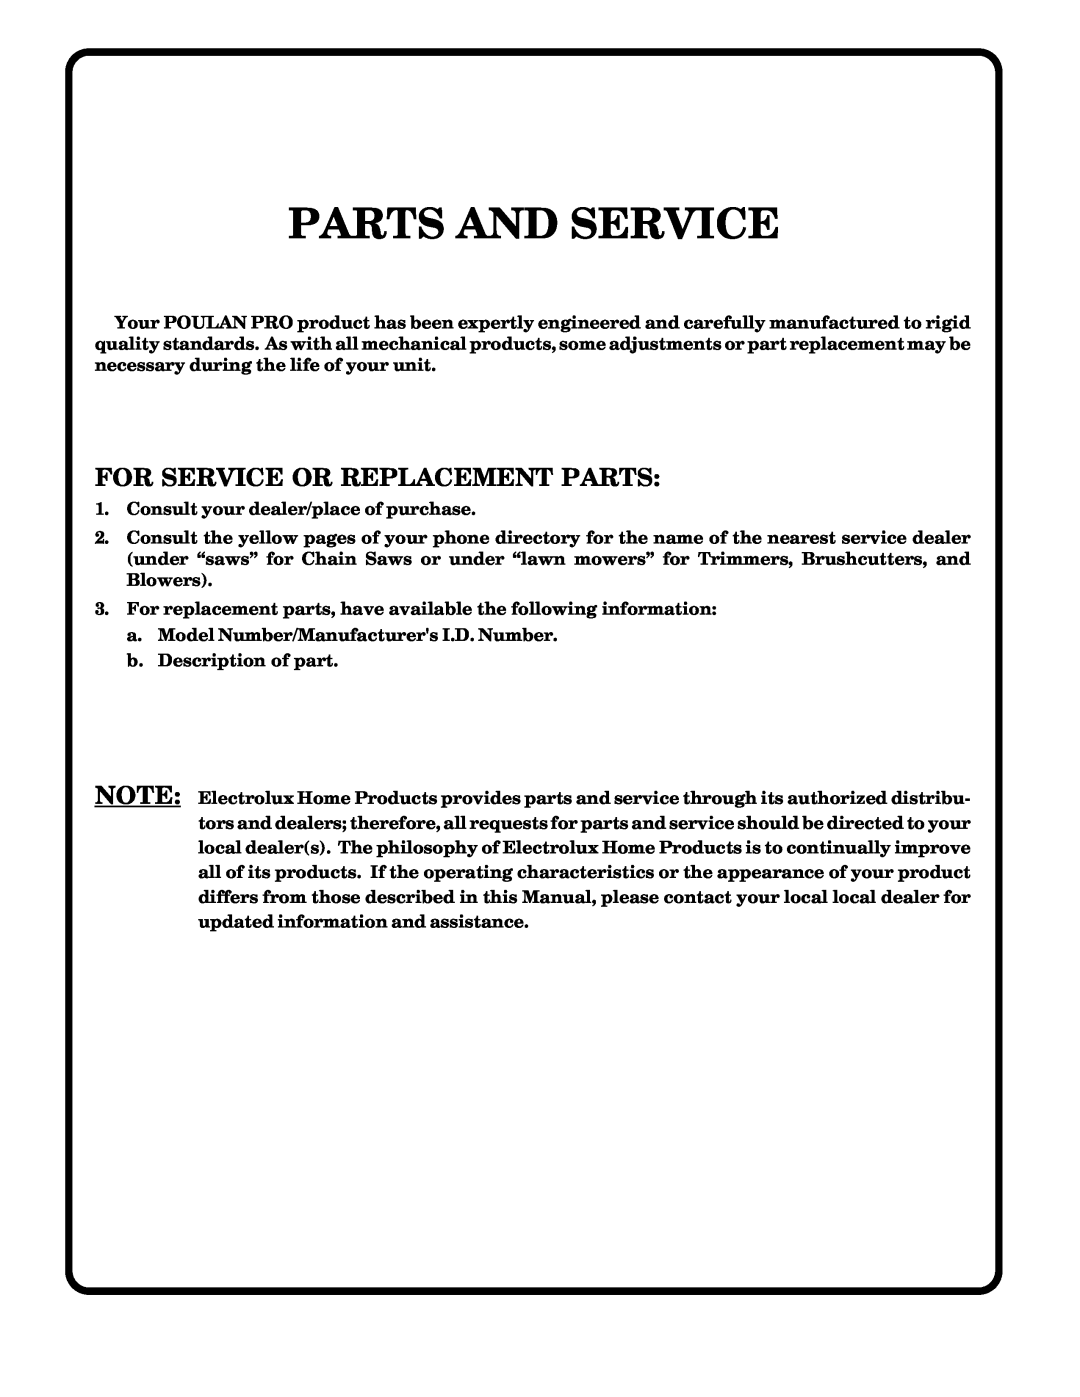 Poulan 177552 owner manual Parts And Service, For Service Or Replacement Parts 